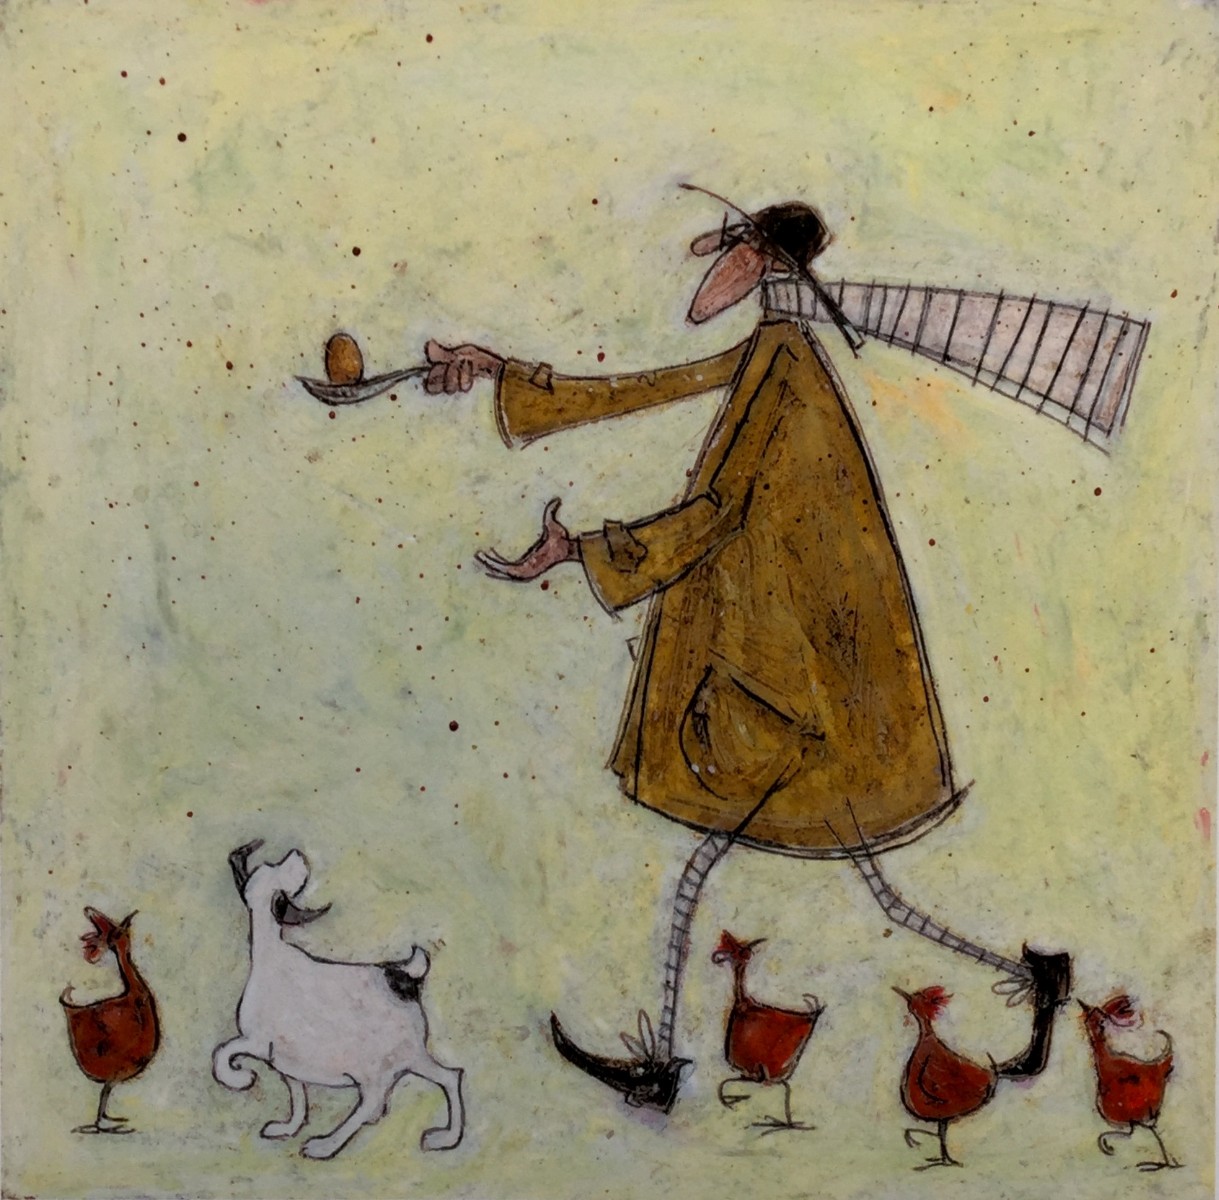 Egg and Spoon by Sam Toft